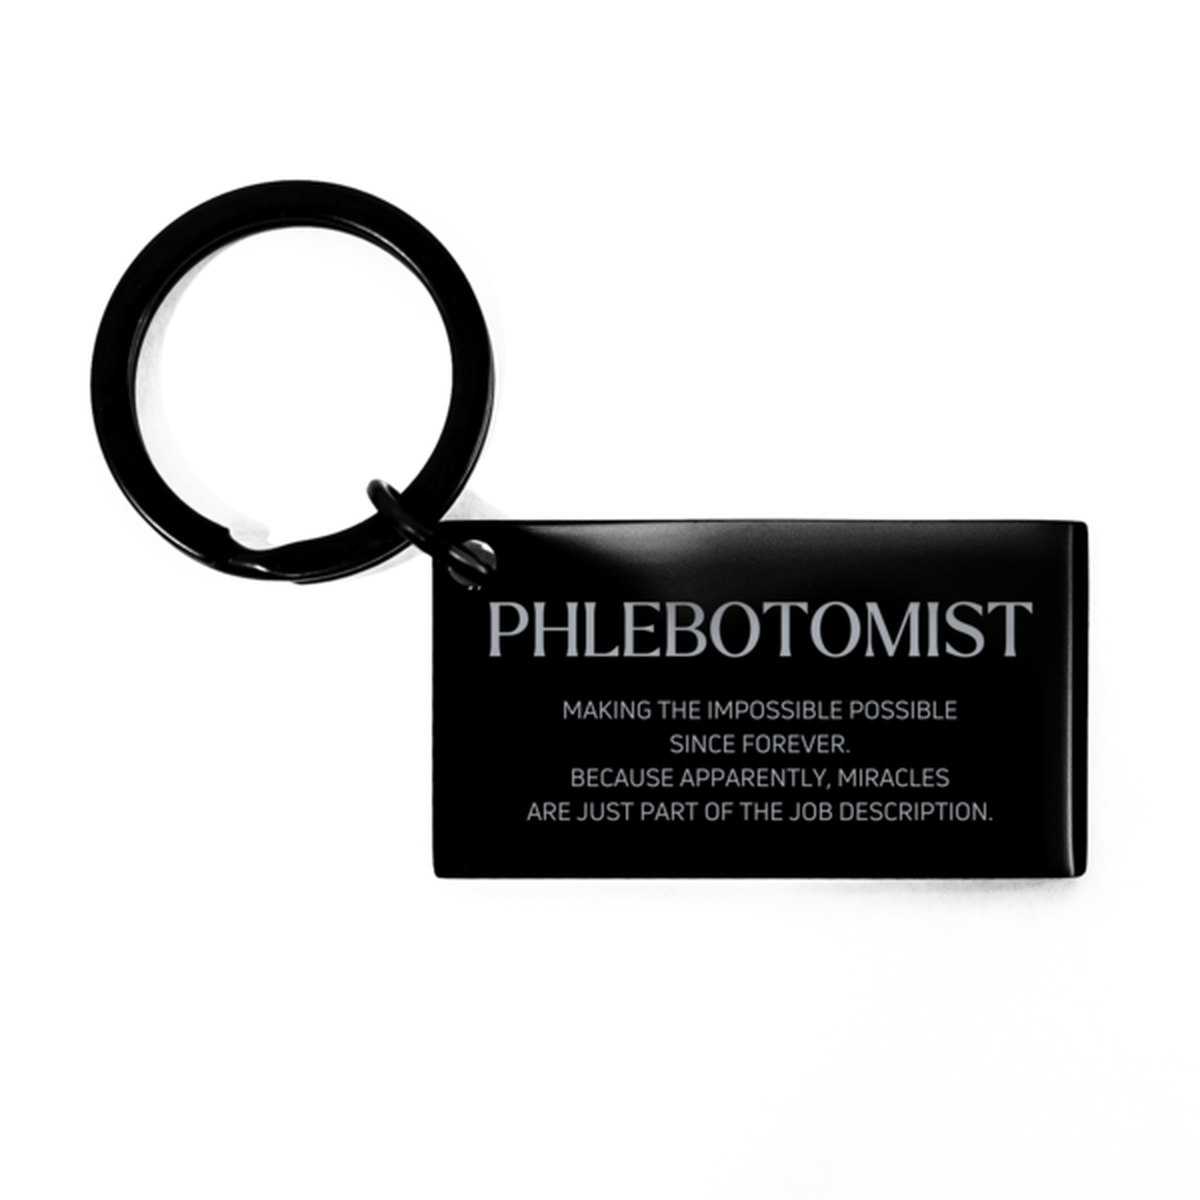 Funny Phlebotomist Gifts, Miracles are just part of the job description, Inspirational Birthday Keychain For Phlebotomist, Men, Women, Coworkers, Friends, Boss